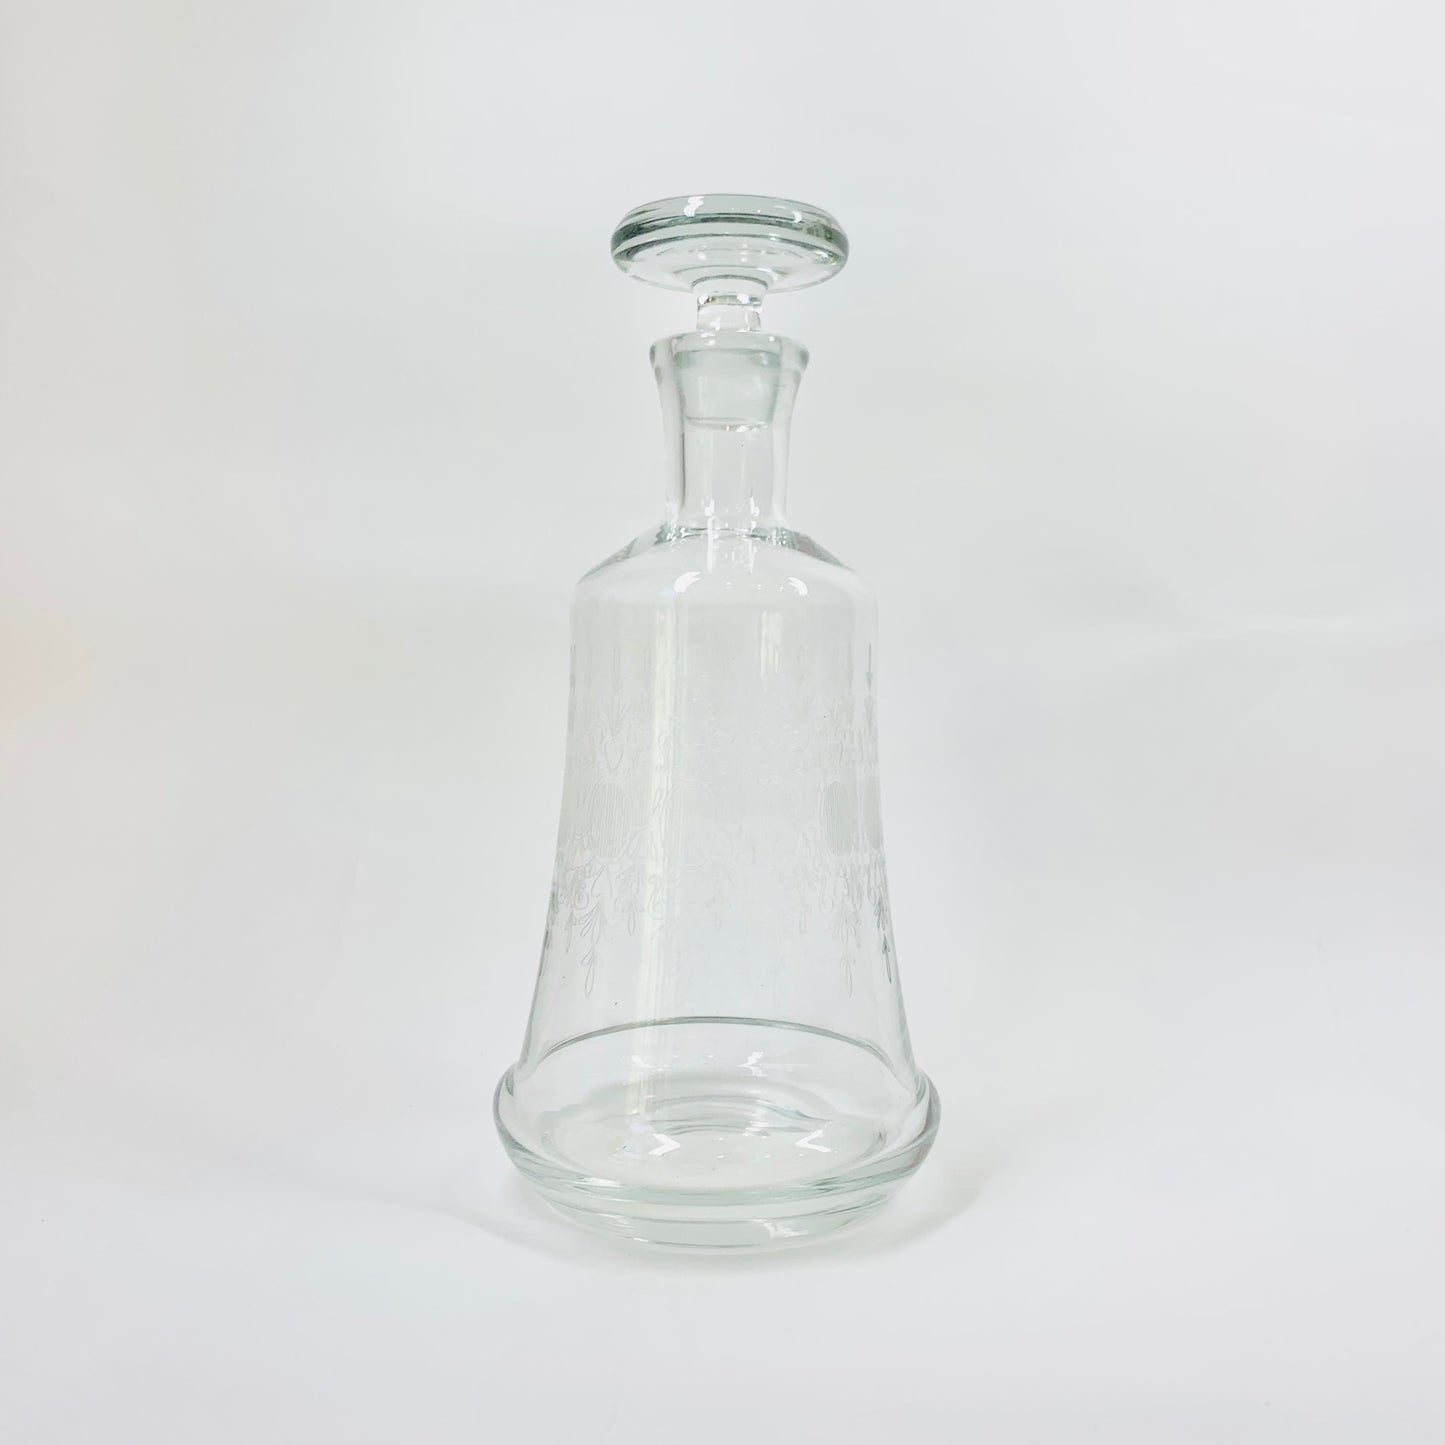 Midcentury etched glass decanter